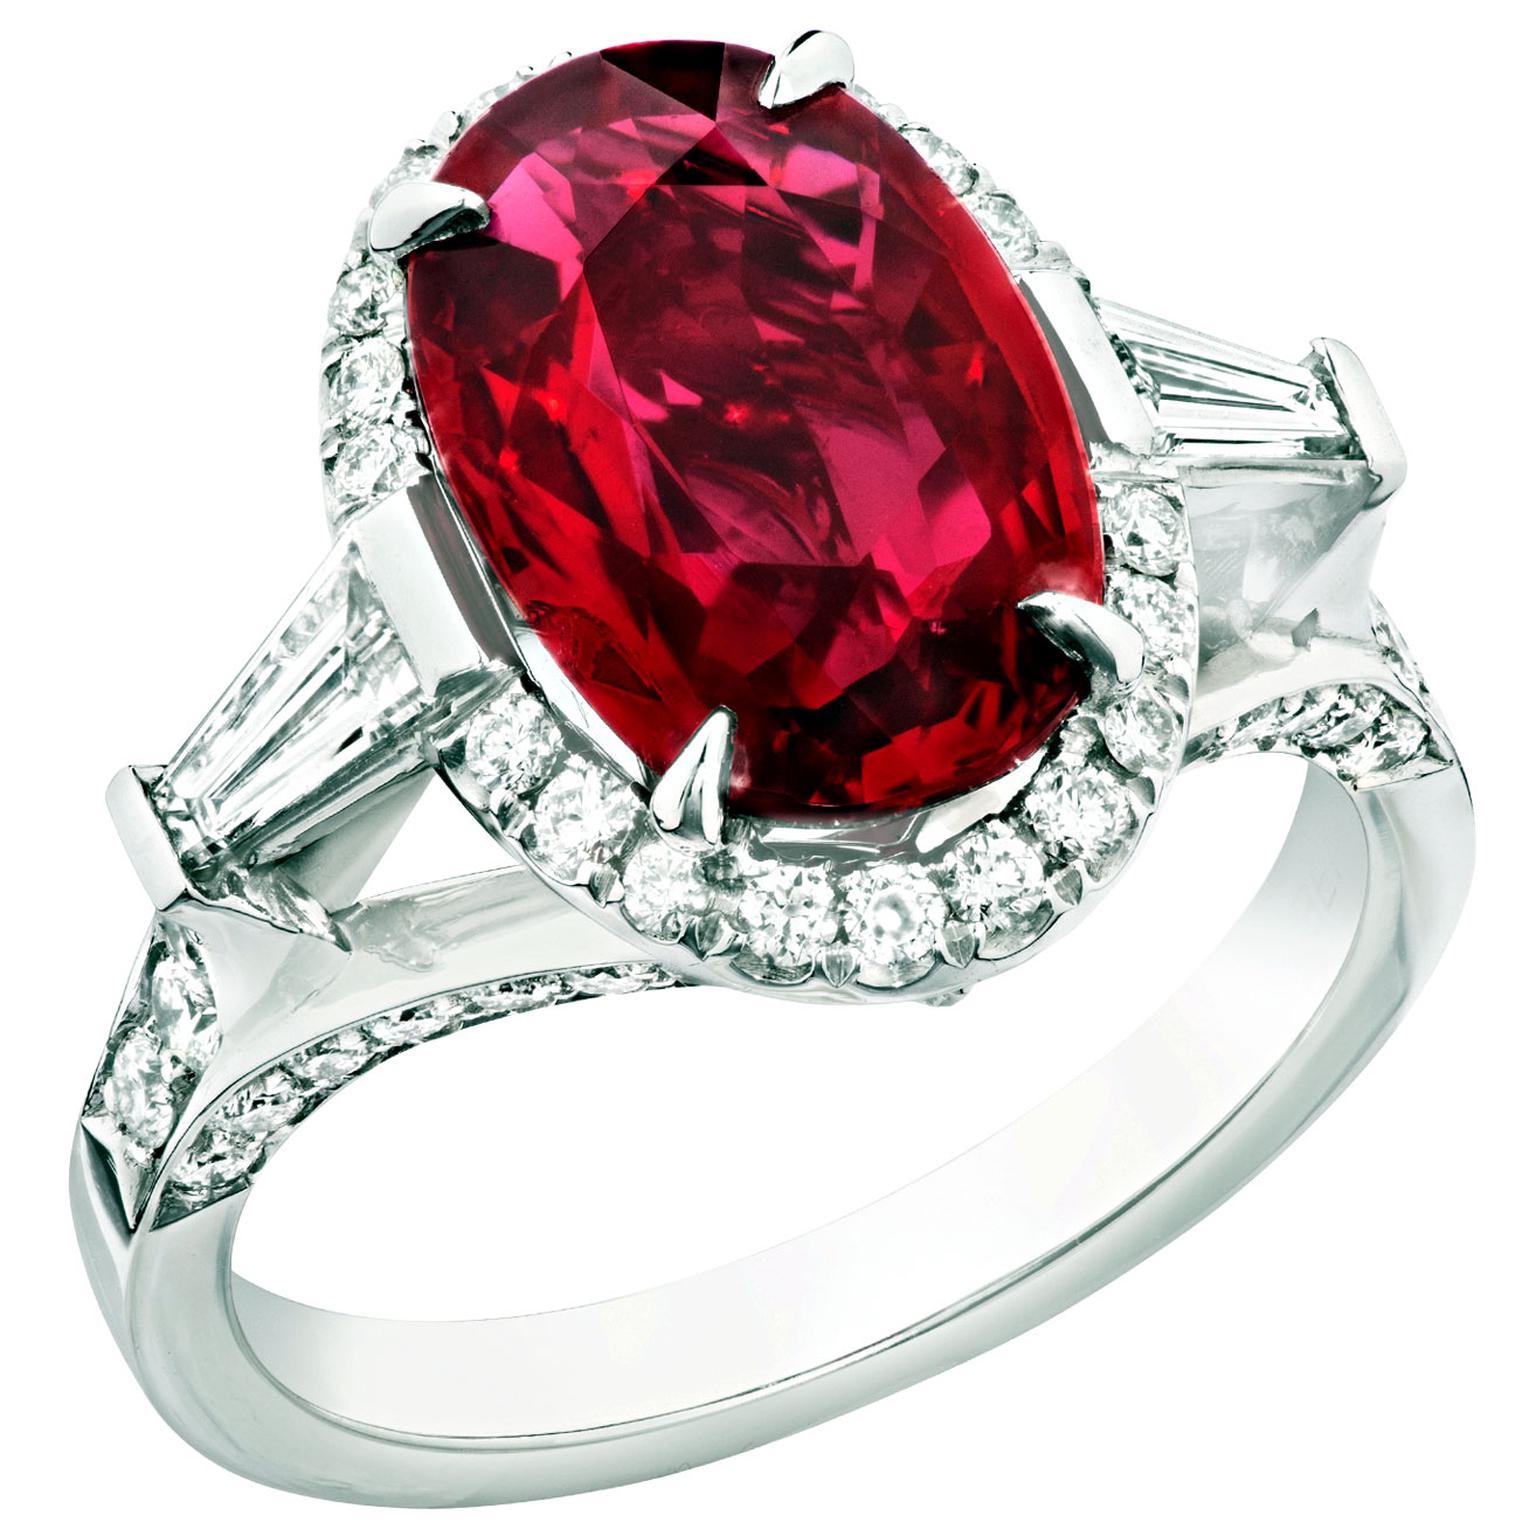 Fabergé oval-cut ruby ring